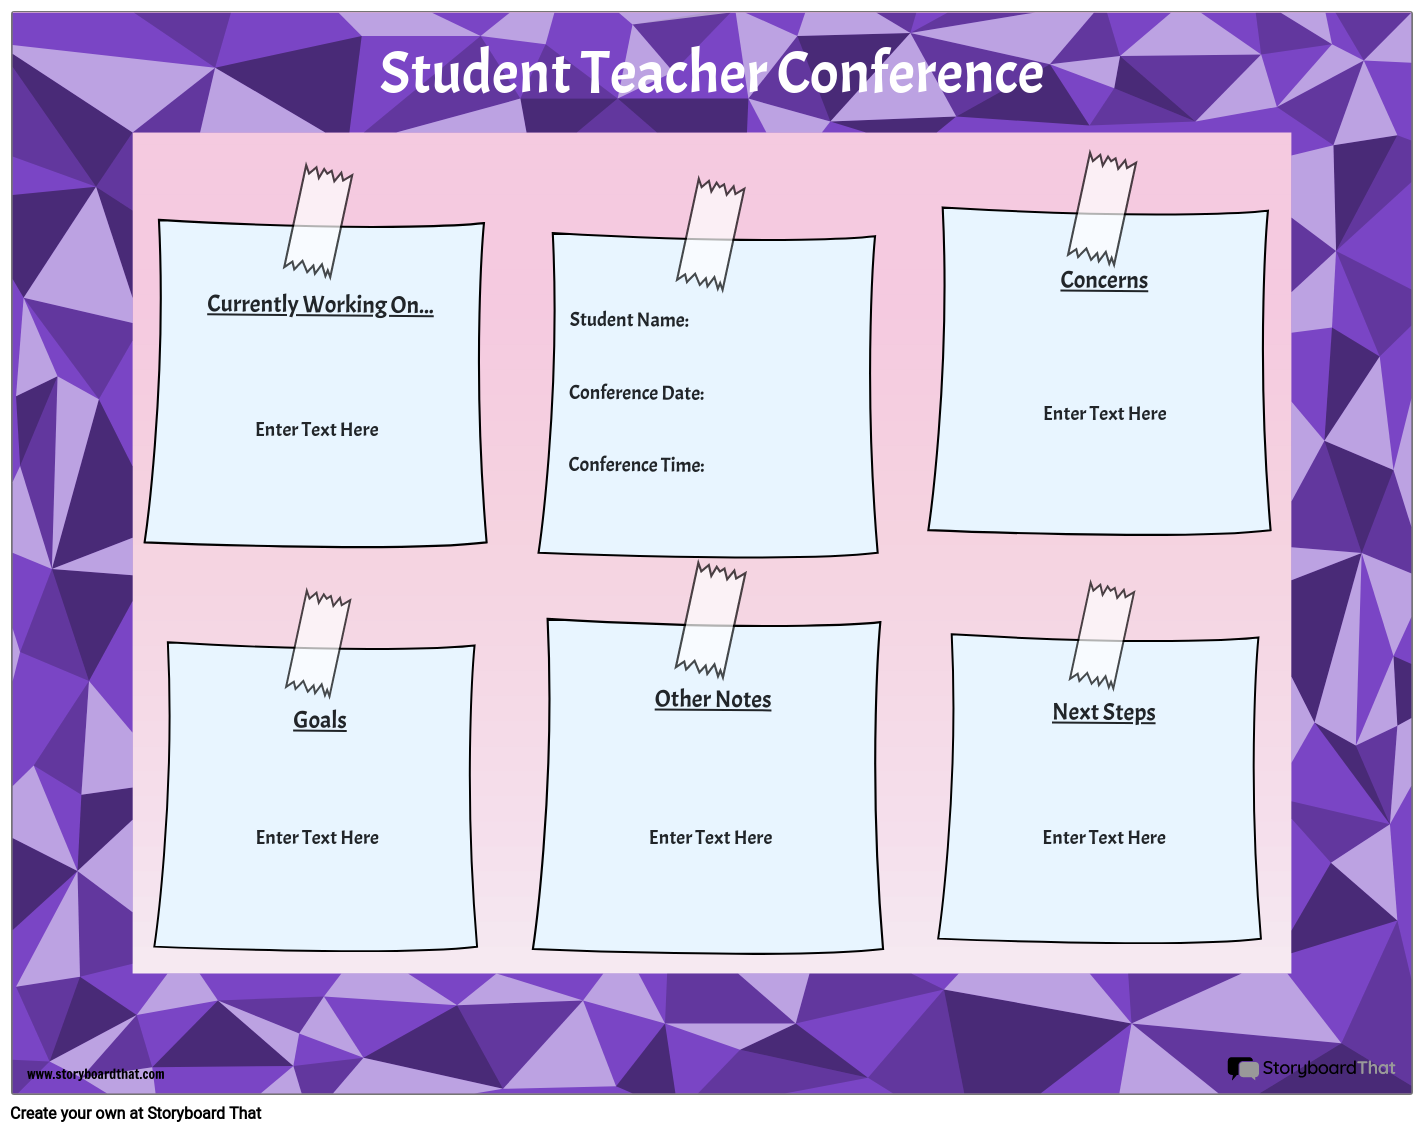 Post it Notes Based Student/ Teacher Conference Template